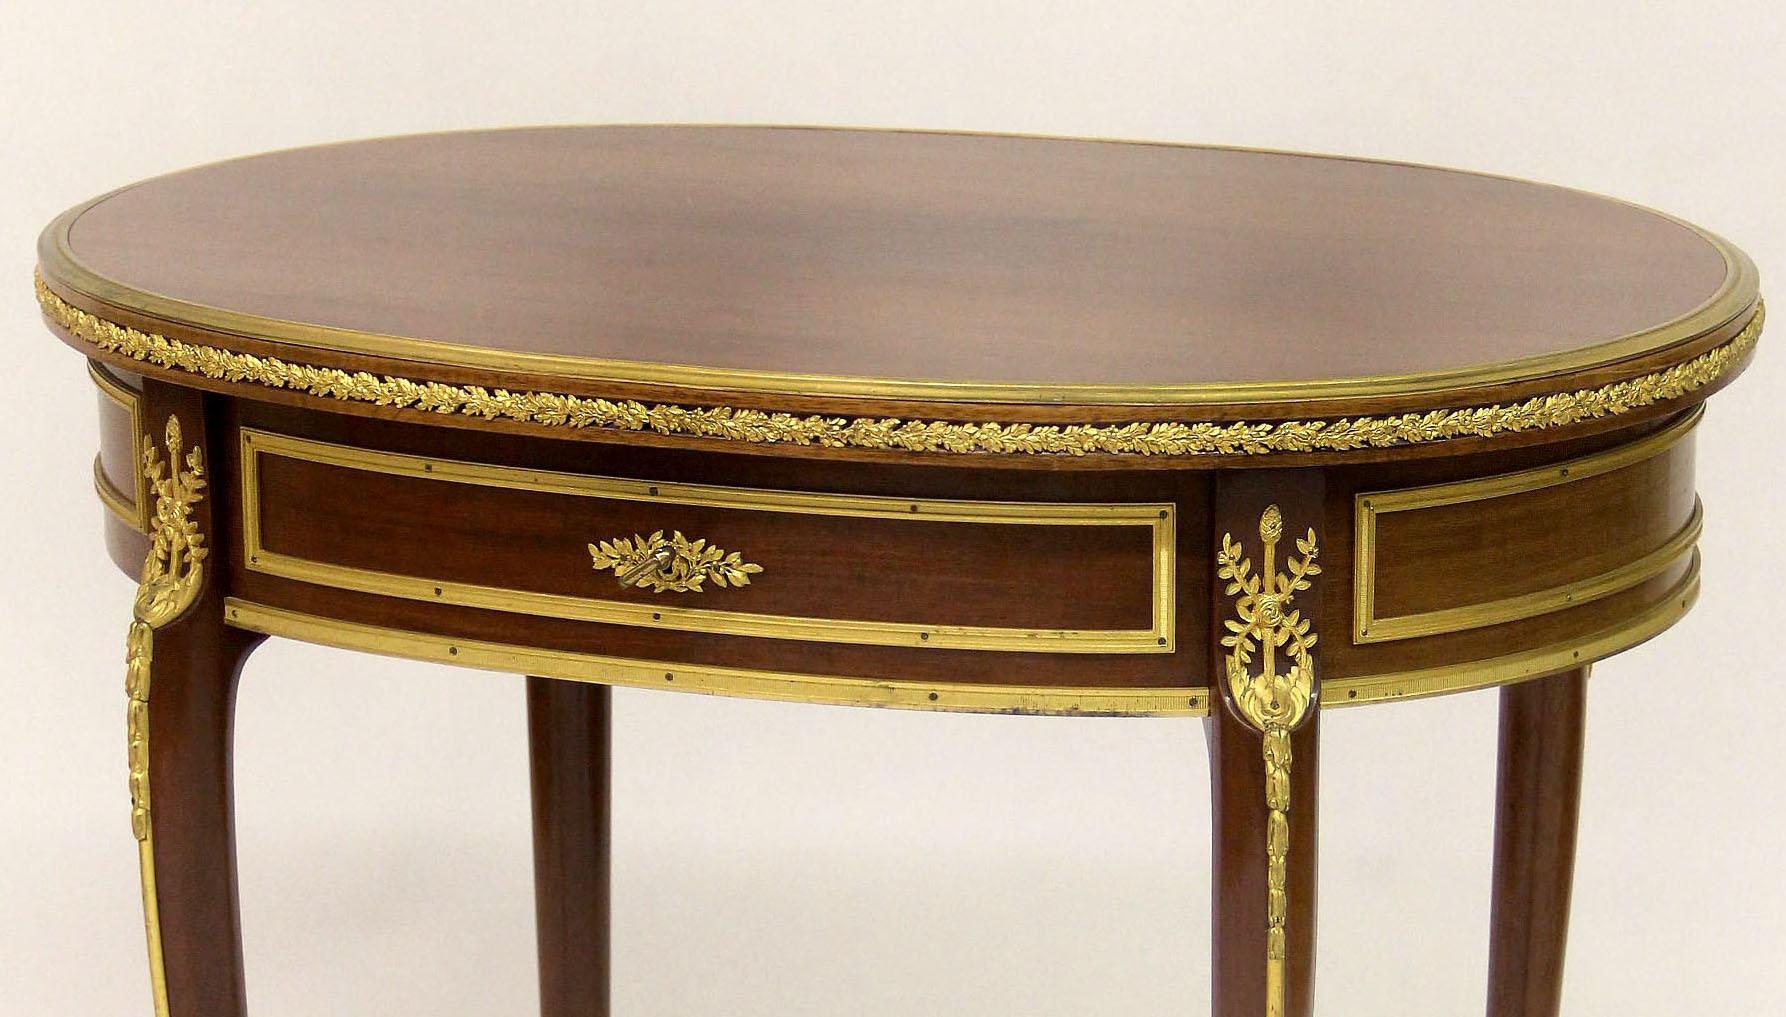 A nice quality late 19th century gilt bronze-mounted Louis XV style side table

An oval wood top over a single long, center drawer, raised on cabriole legs.